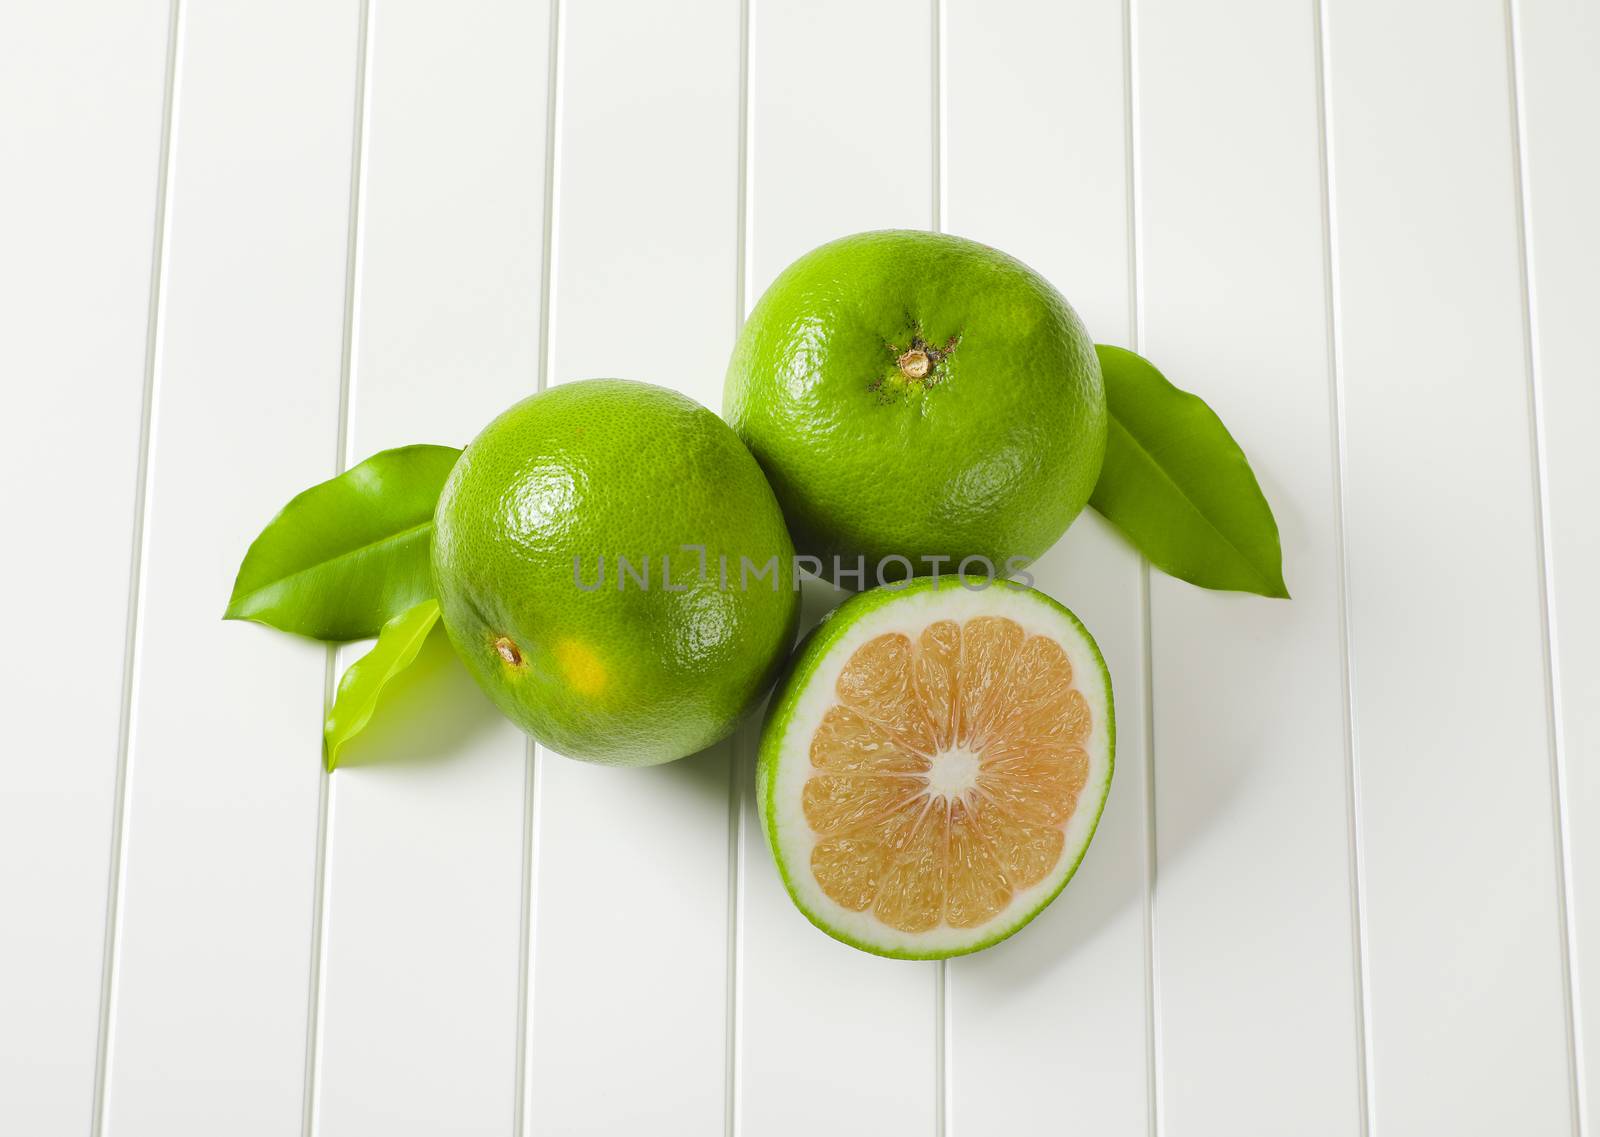 Sweetie fruits (green grapefruits, pomelits) by Digifoodstock